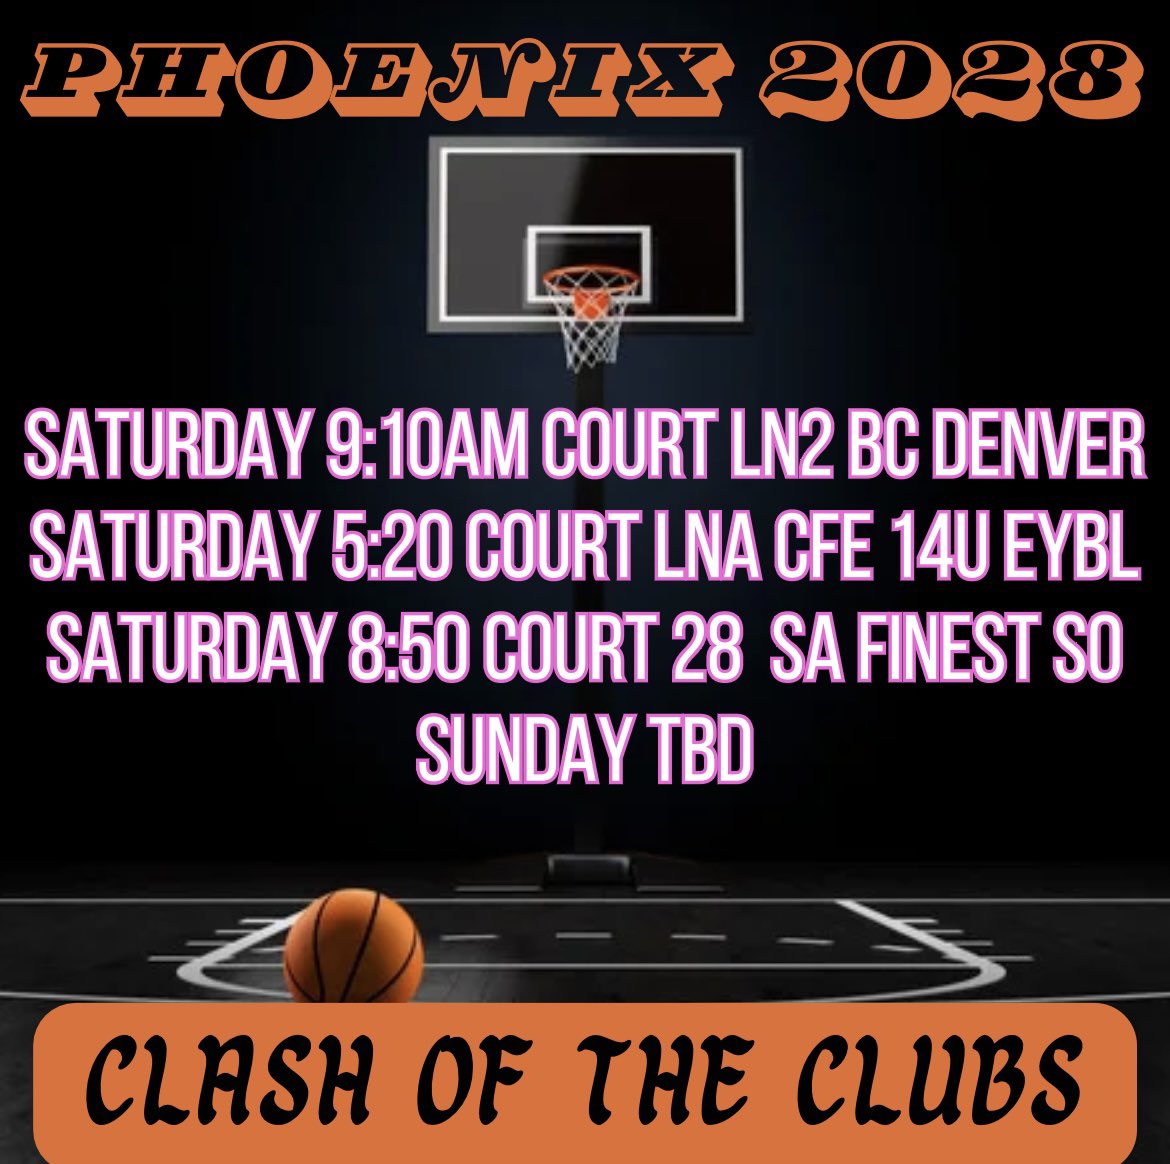 Phoenix 2028 schedule for Clash of the Clubs in Houston at NRG Center this weekend‼️ Let’s go! #PhoenixProud